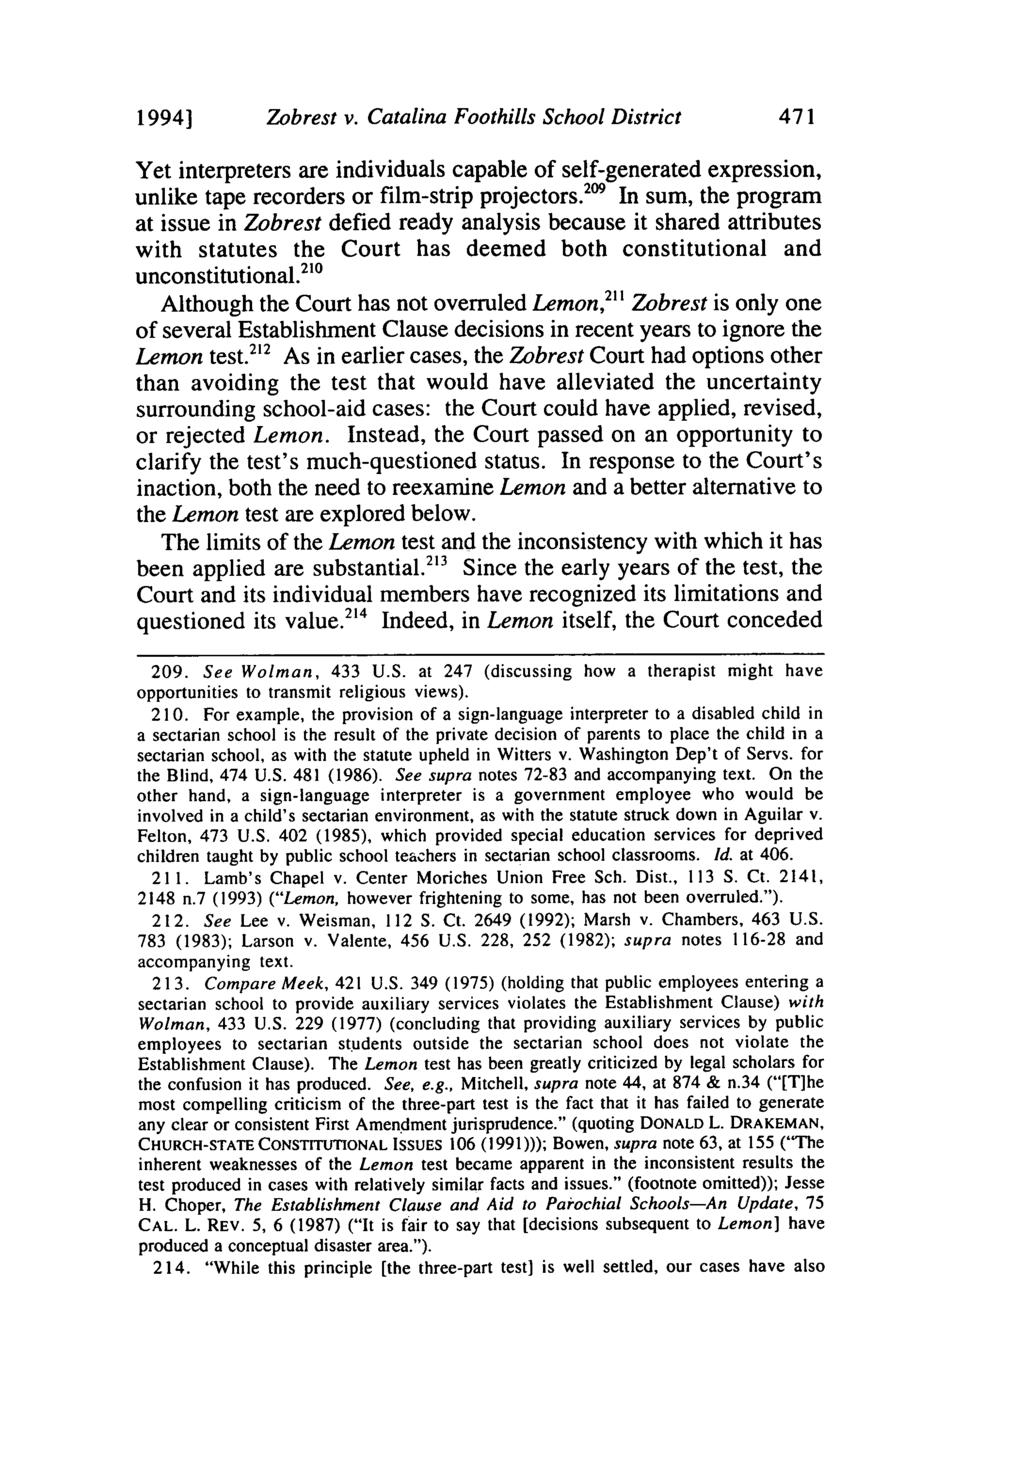 1994] Zobrest v. Catalina Foothills School District Yet interpreters are individuals capable of self-generated expression, unlike tape recorders or film-strip projectors.